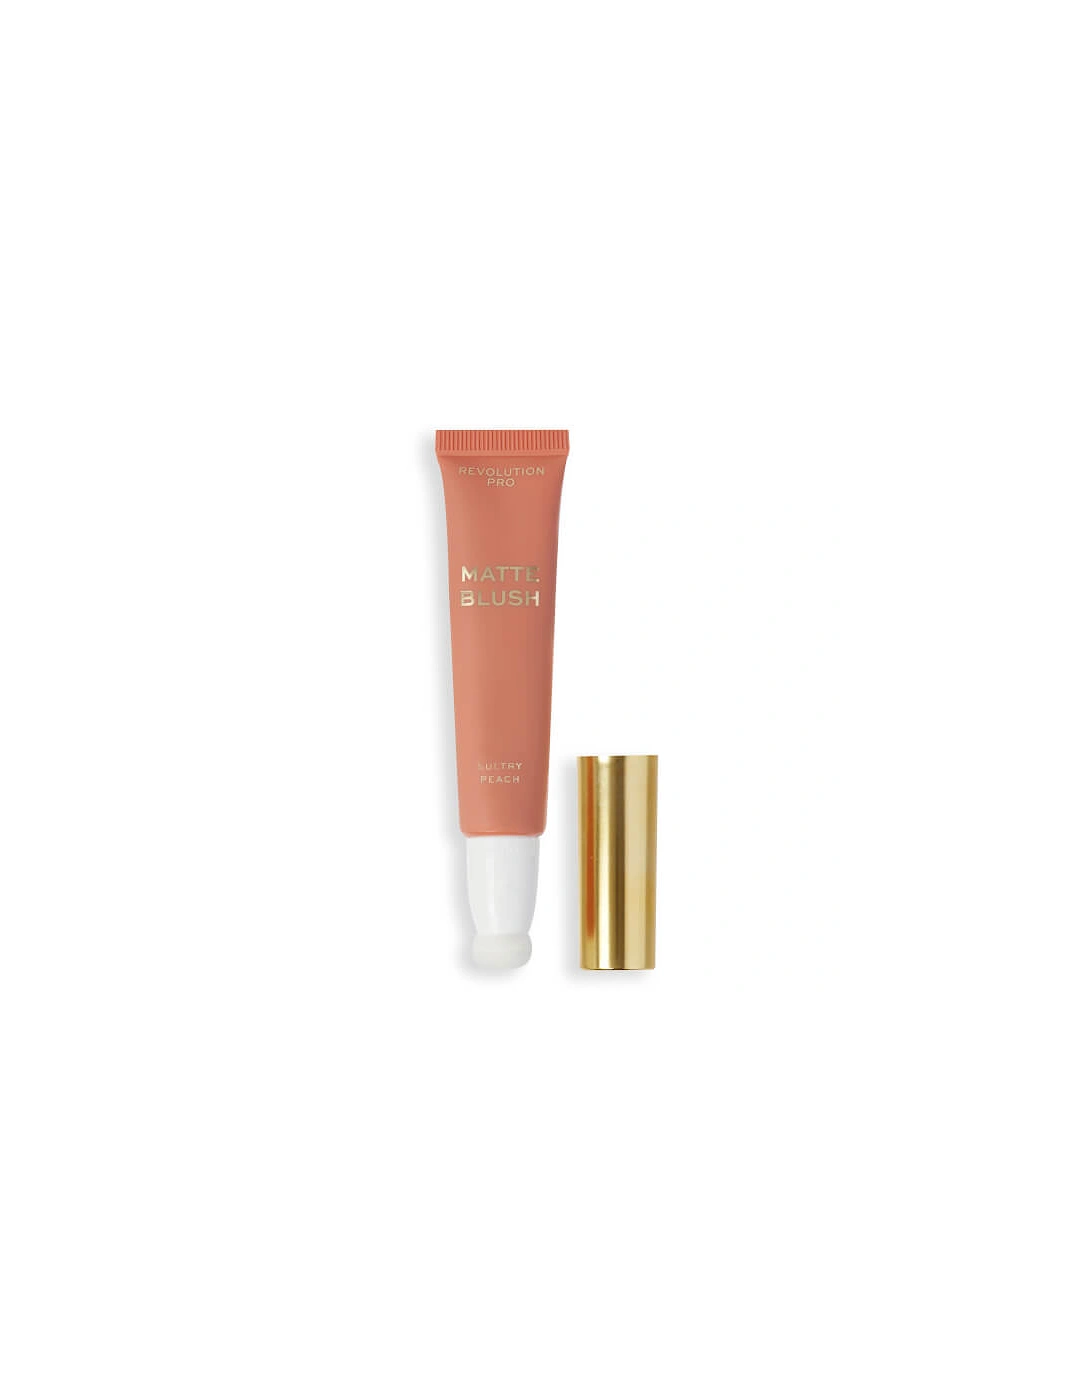 Iconic Matte Cream Blush Wand - Sultry Peach, 2 of 1